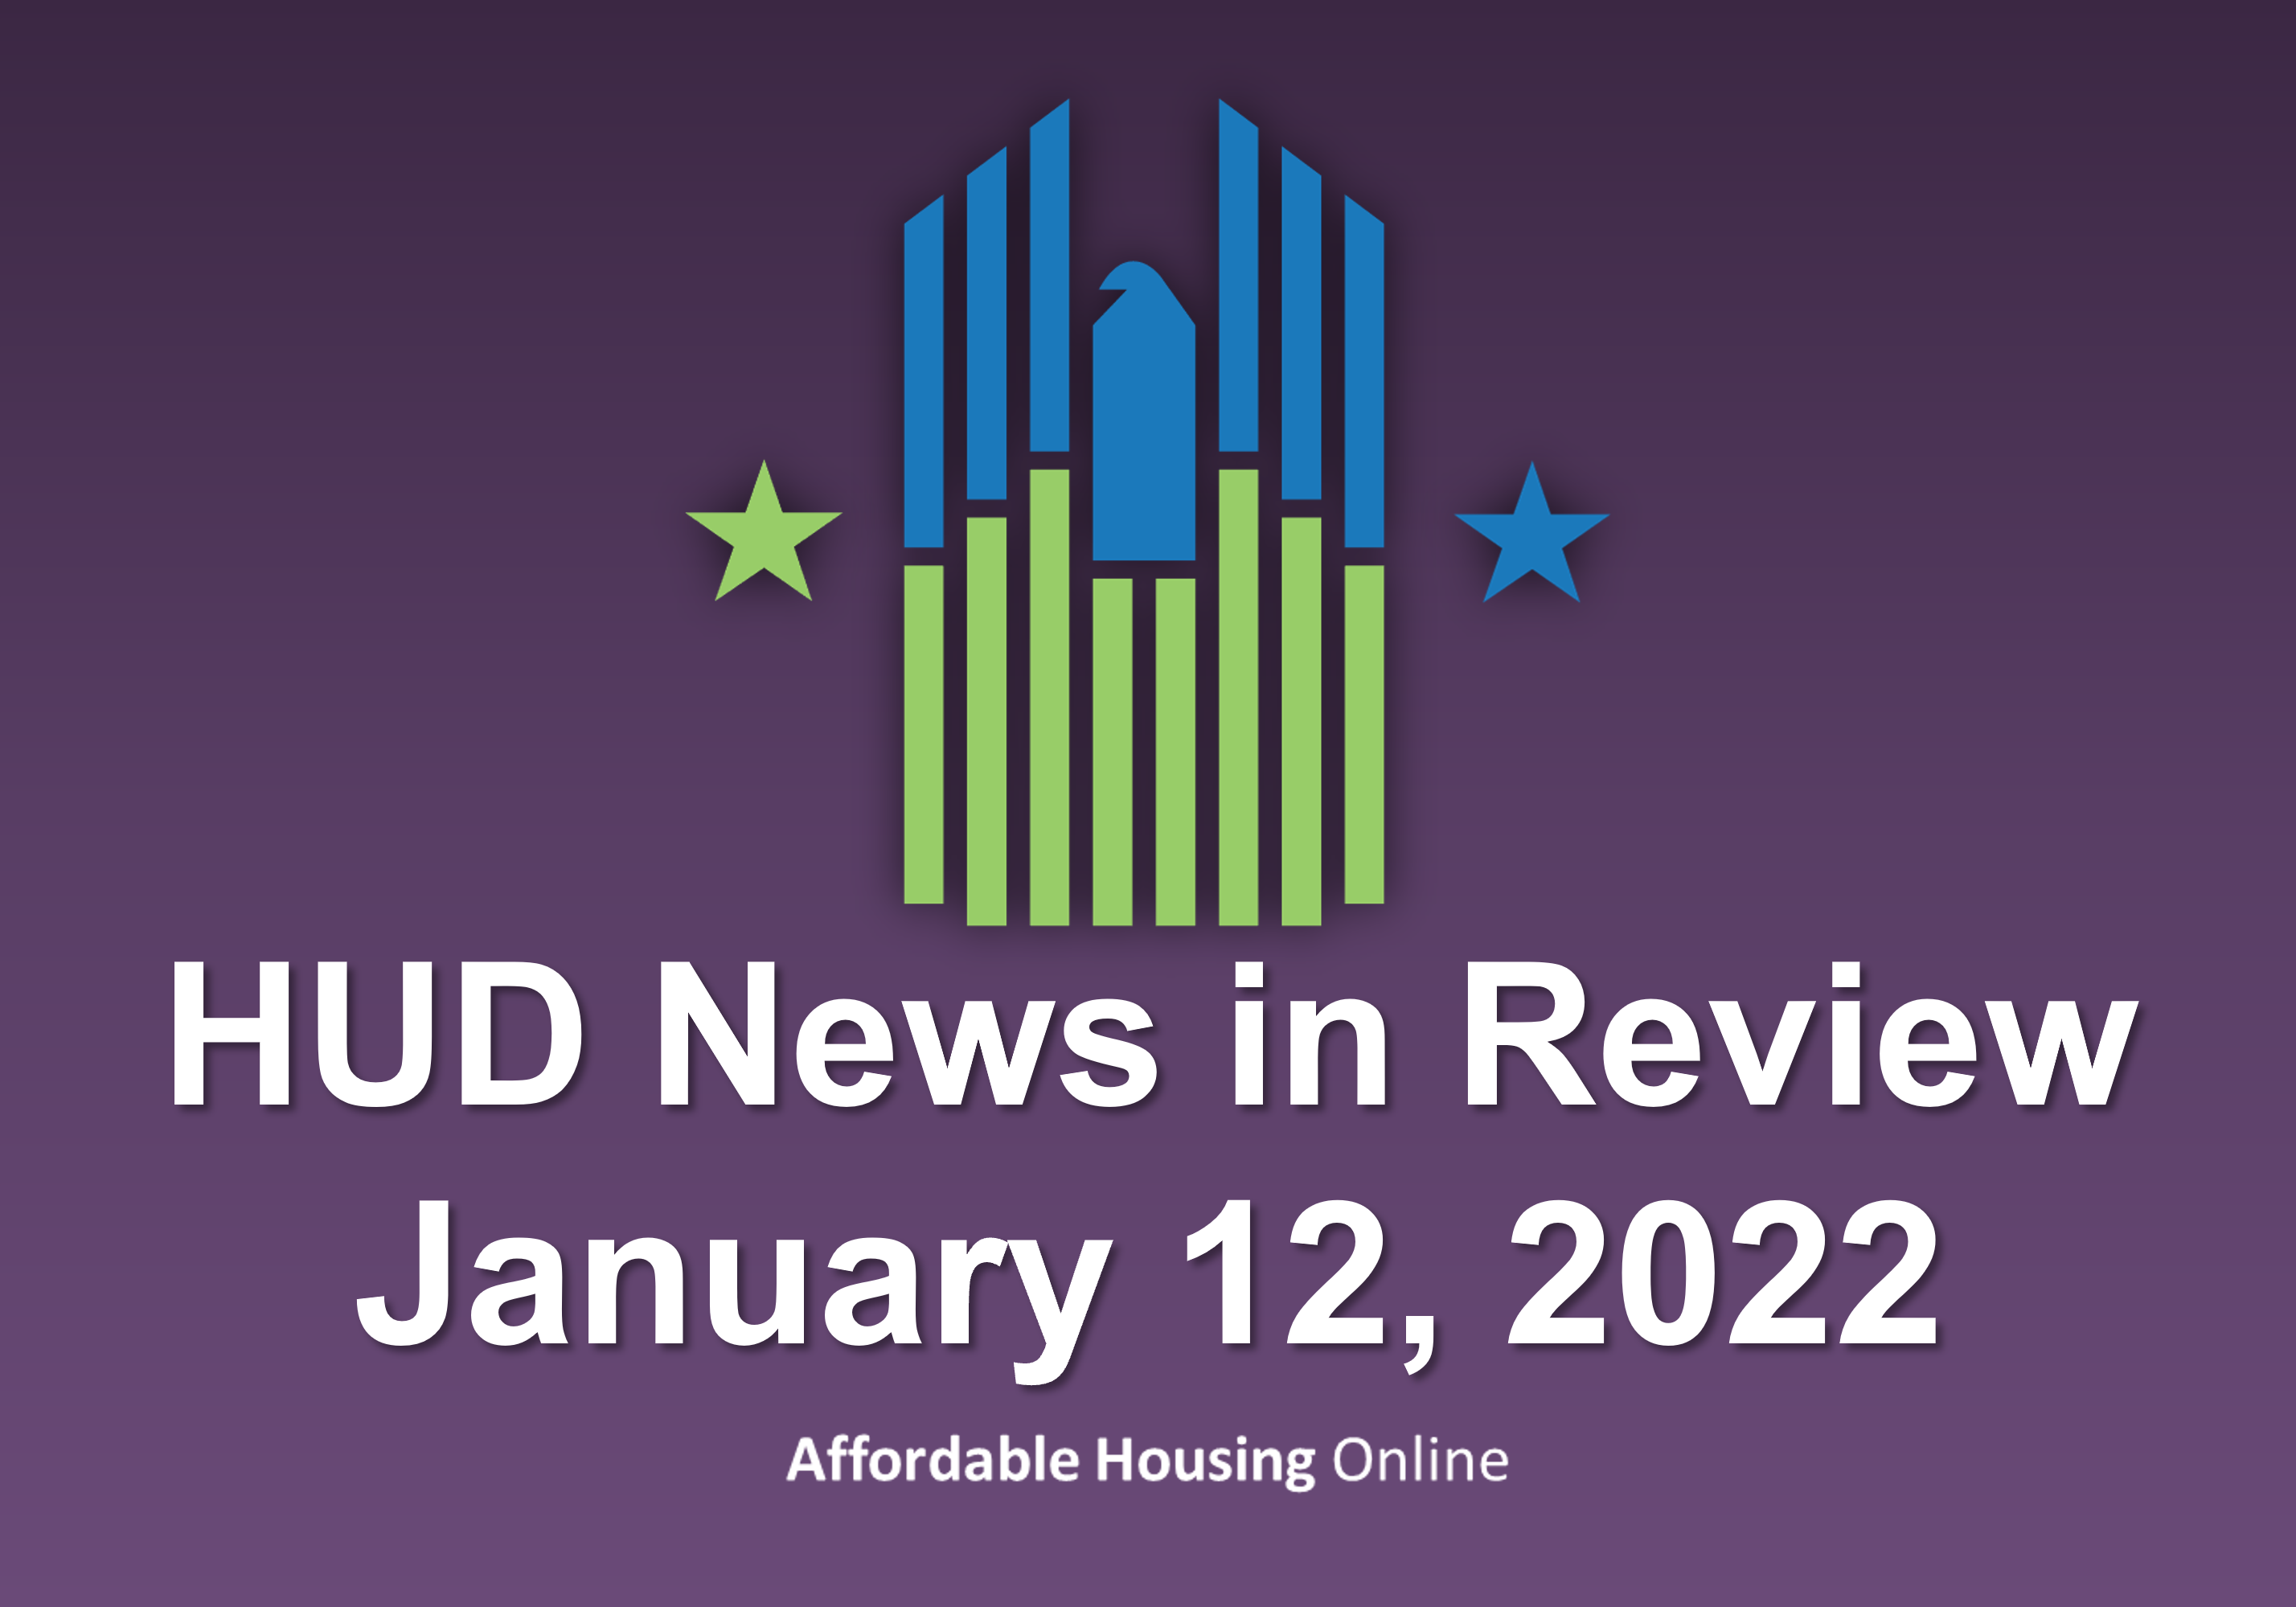 HUD News in Review: January 12, 2022